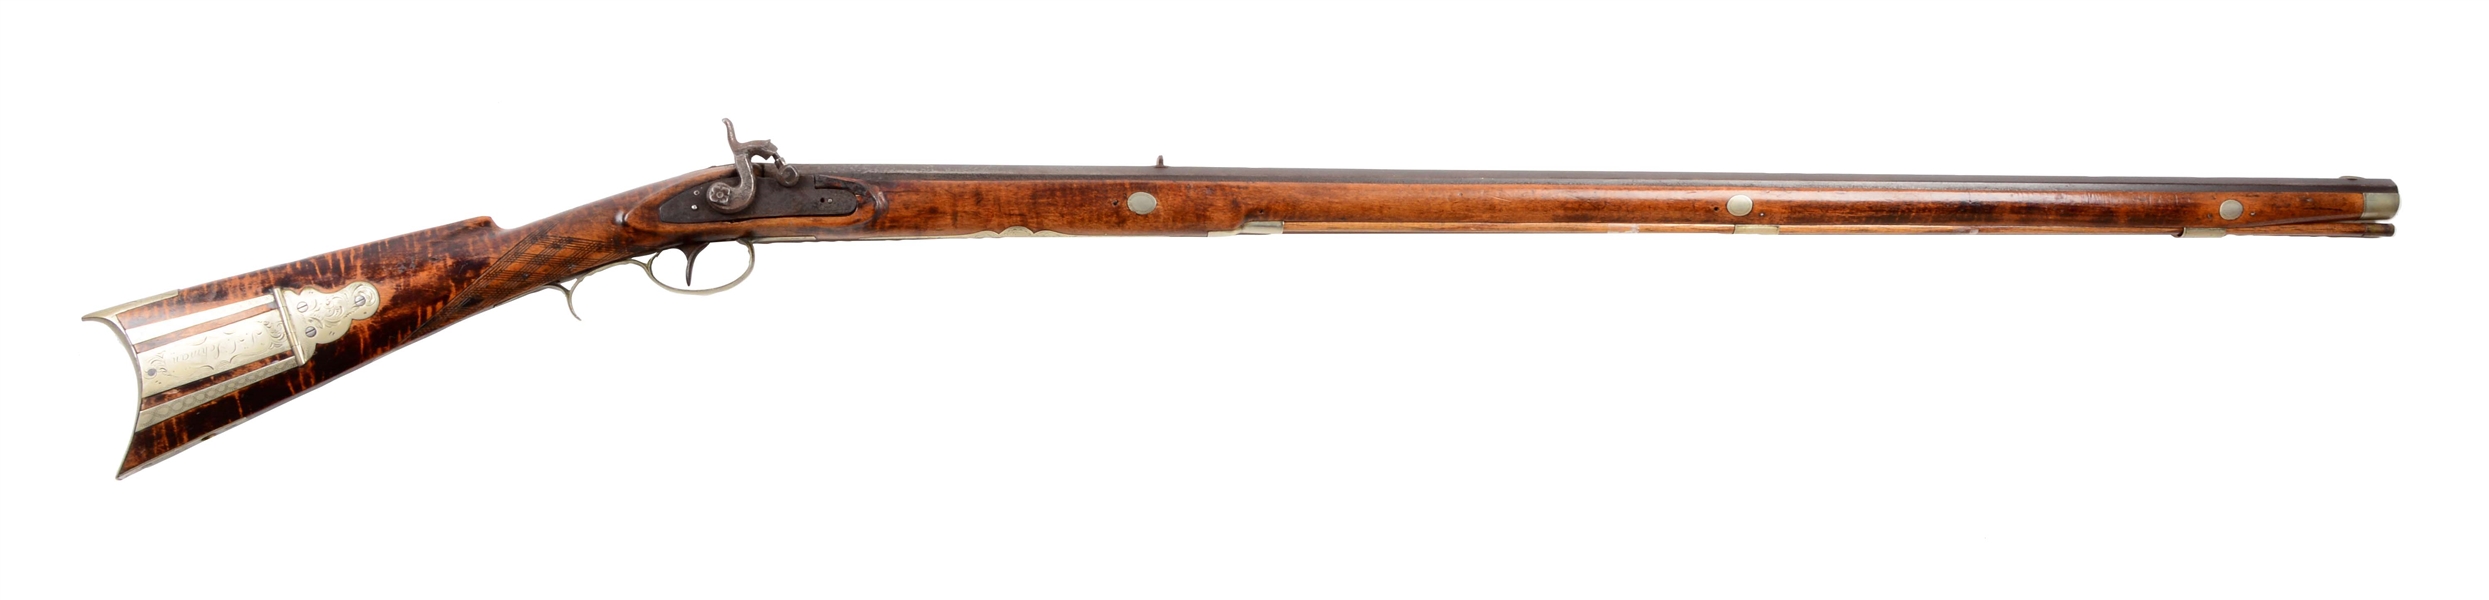 (A) FULLSTOCK SILVER MOUNTED PERCUSSION KENTUCKY TARGET RIFLE MARKED LEMAN.